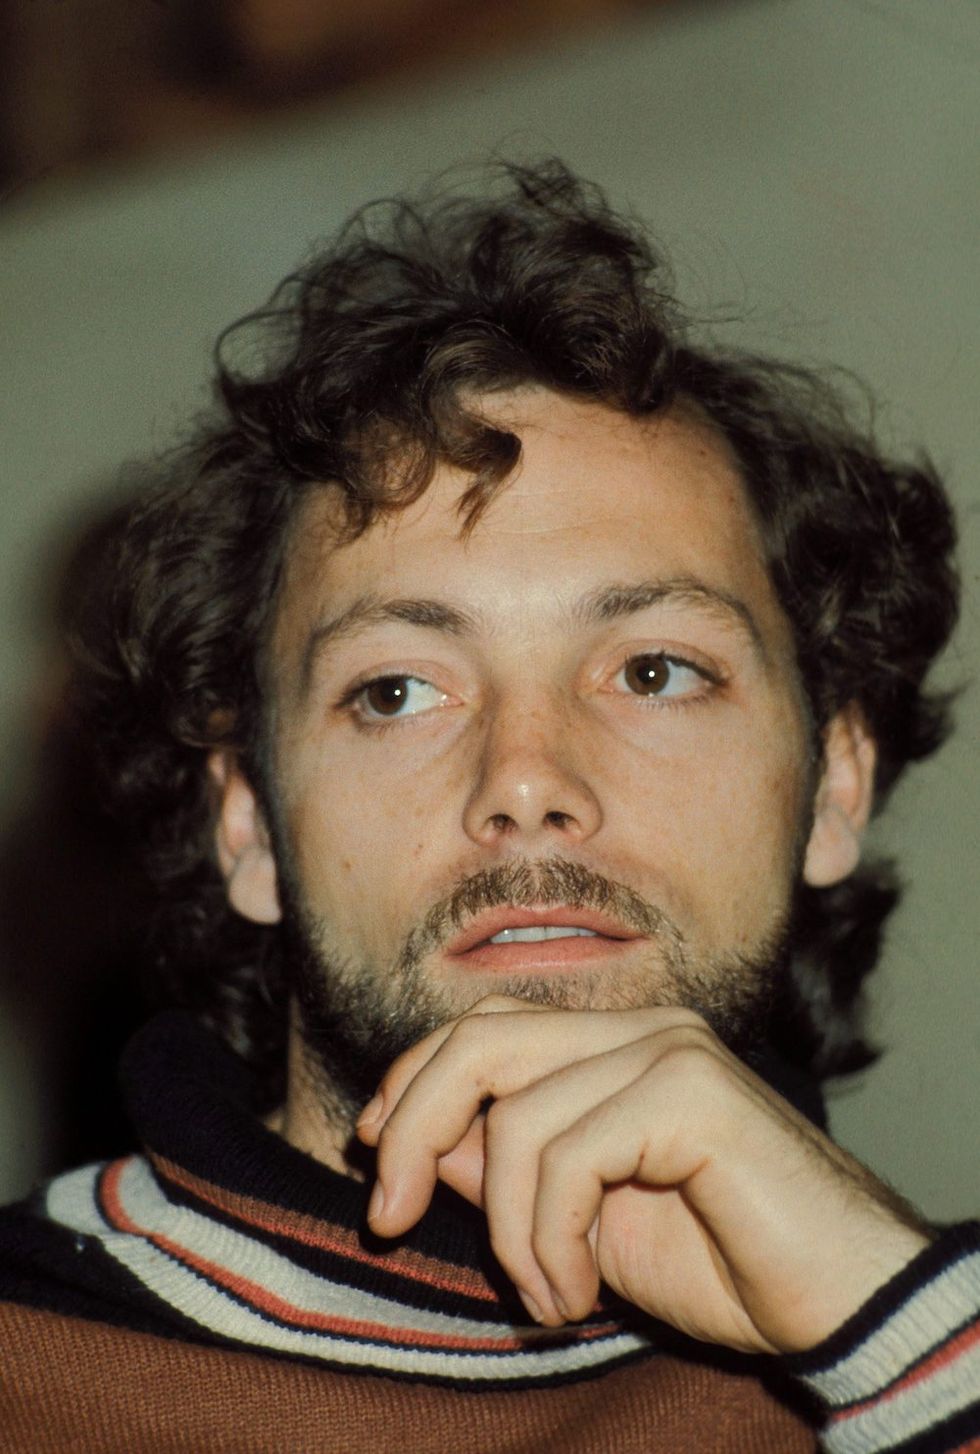 france   january 01  patrick dewaere in deauville, france in 1977  photo by laurent maousgamma rapho via getty images